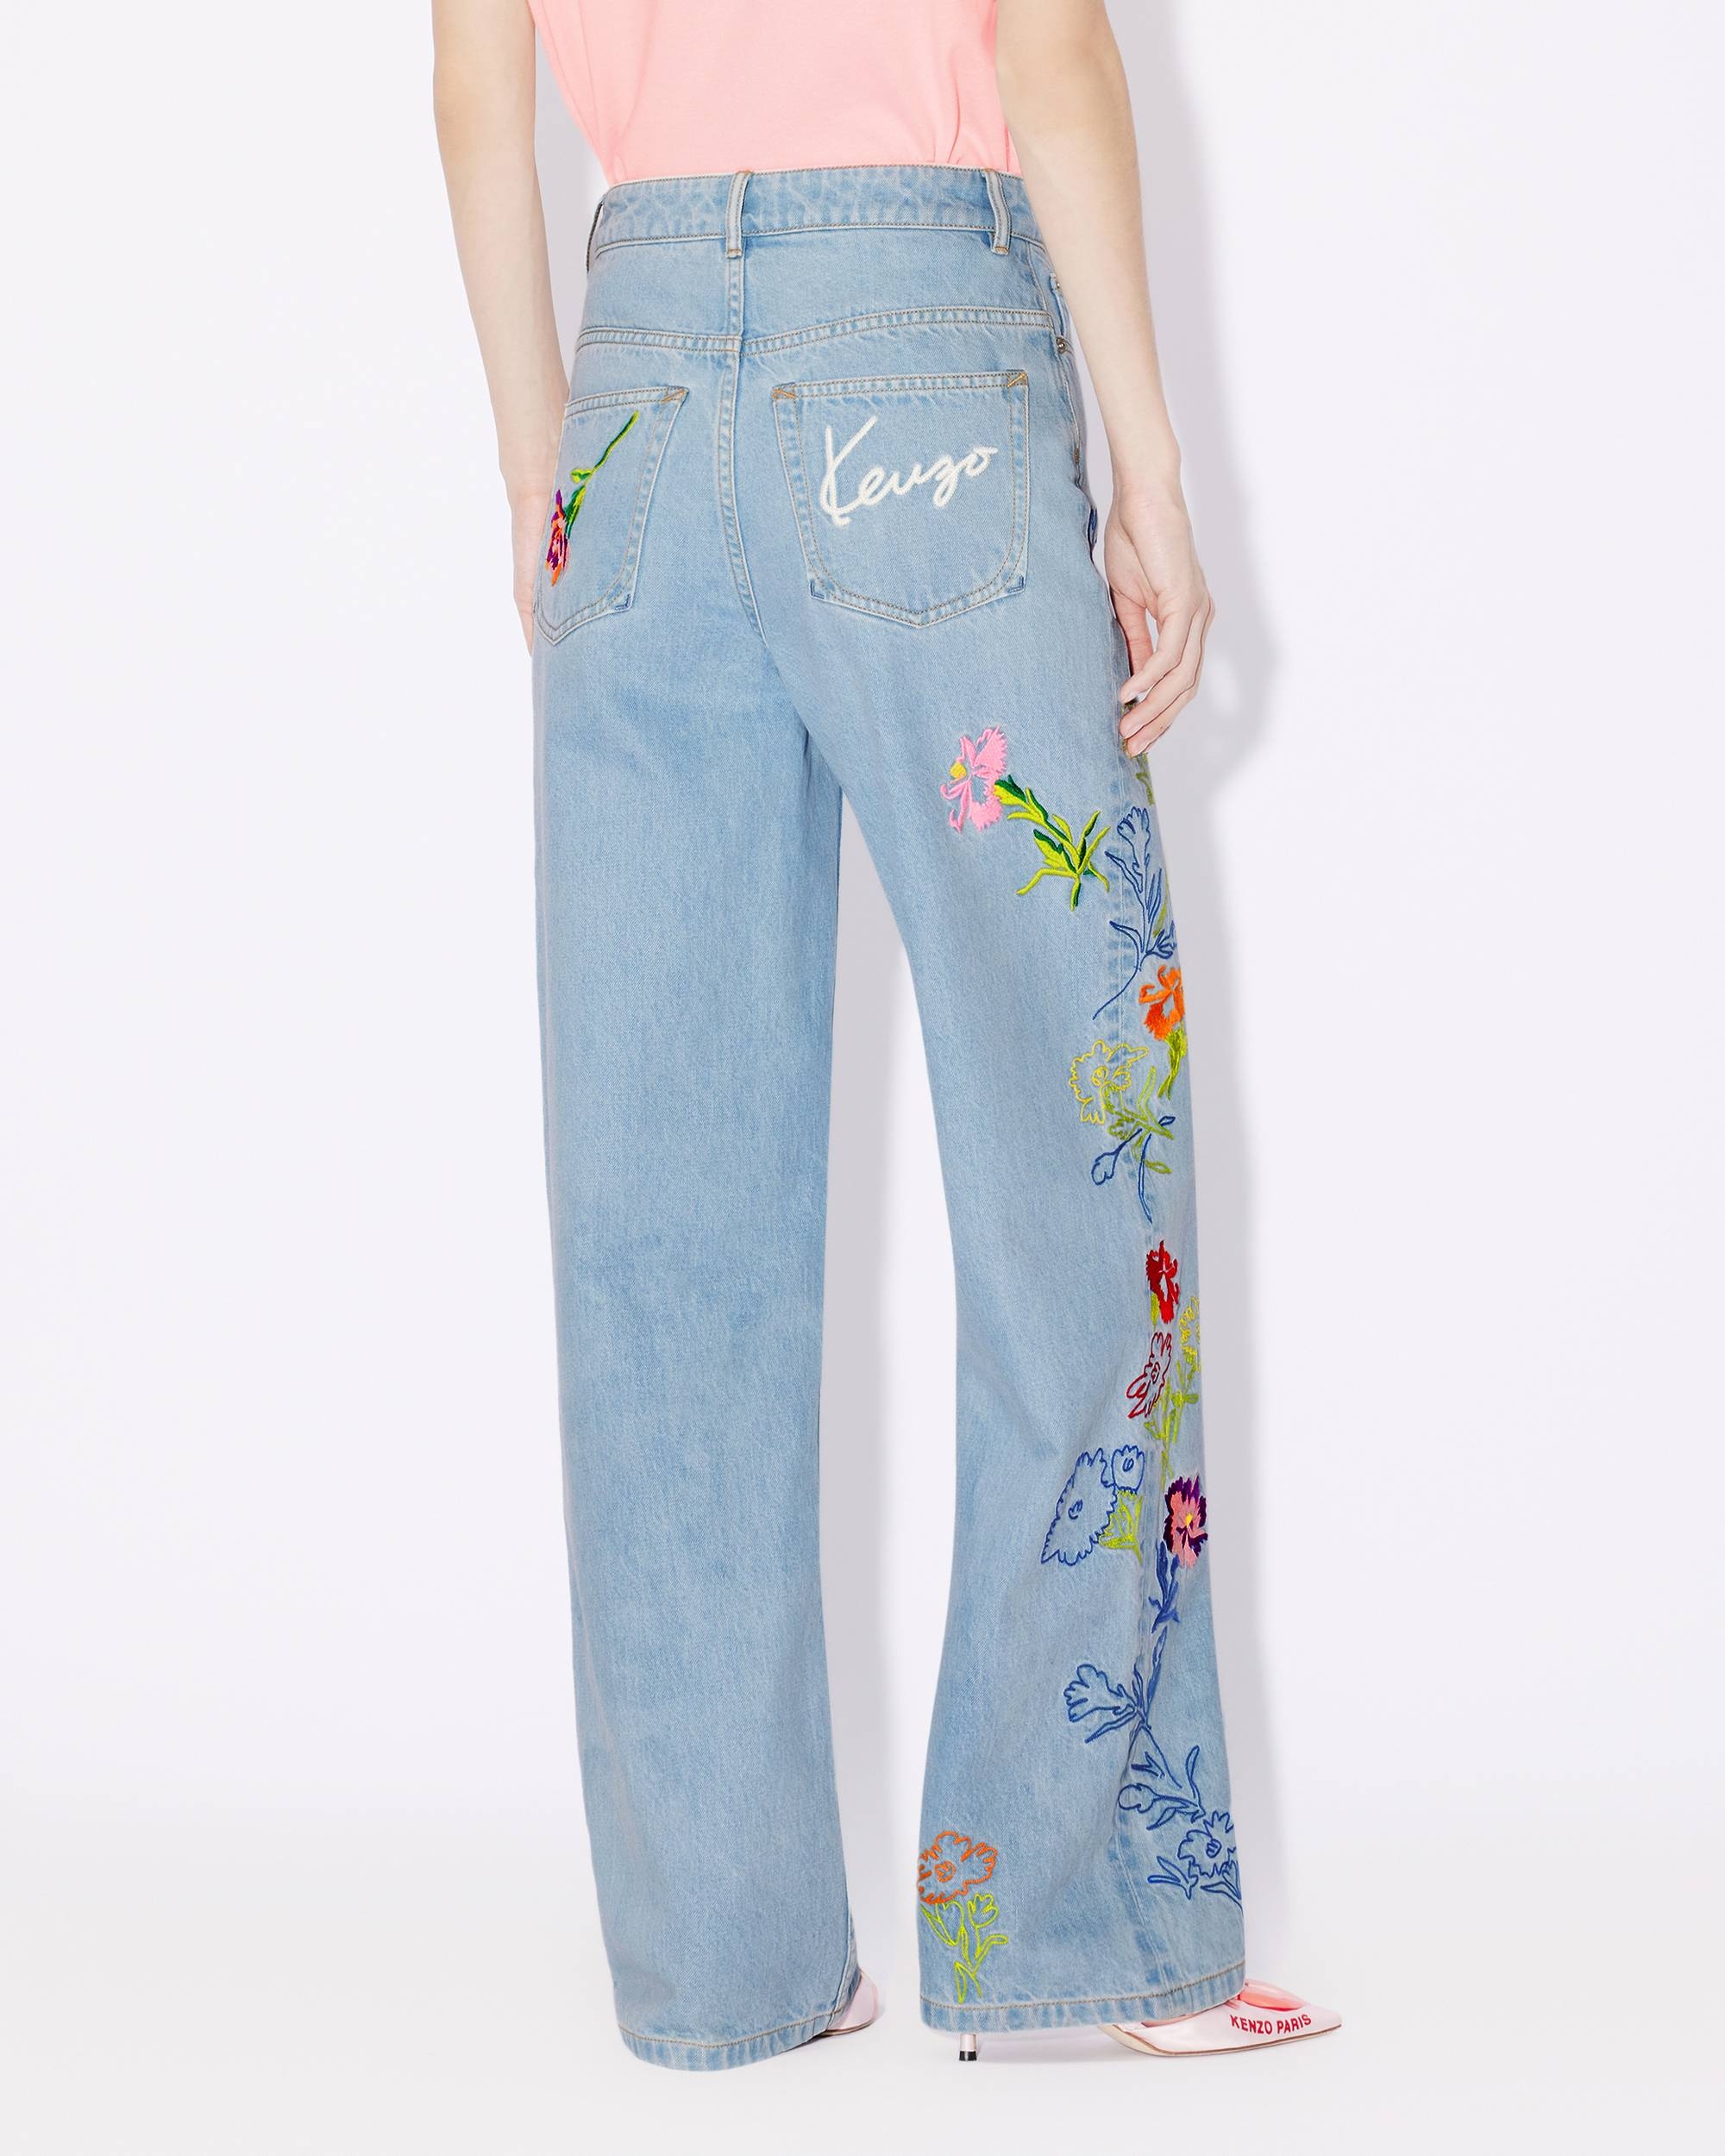 Sumire 'KENZO Drawn Flowers' embroidered cropped jeans - 5